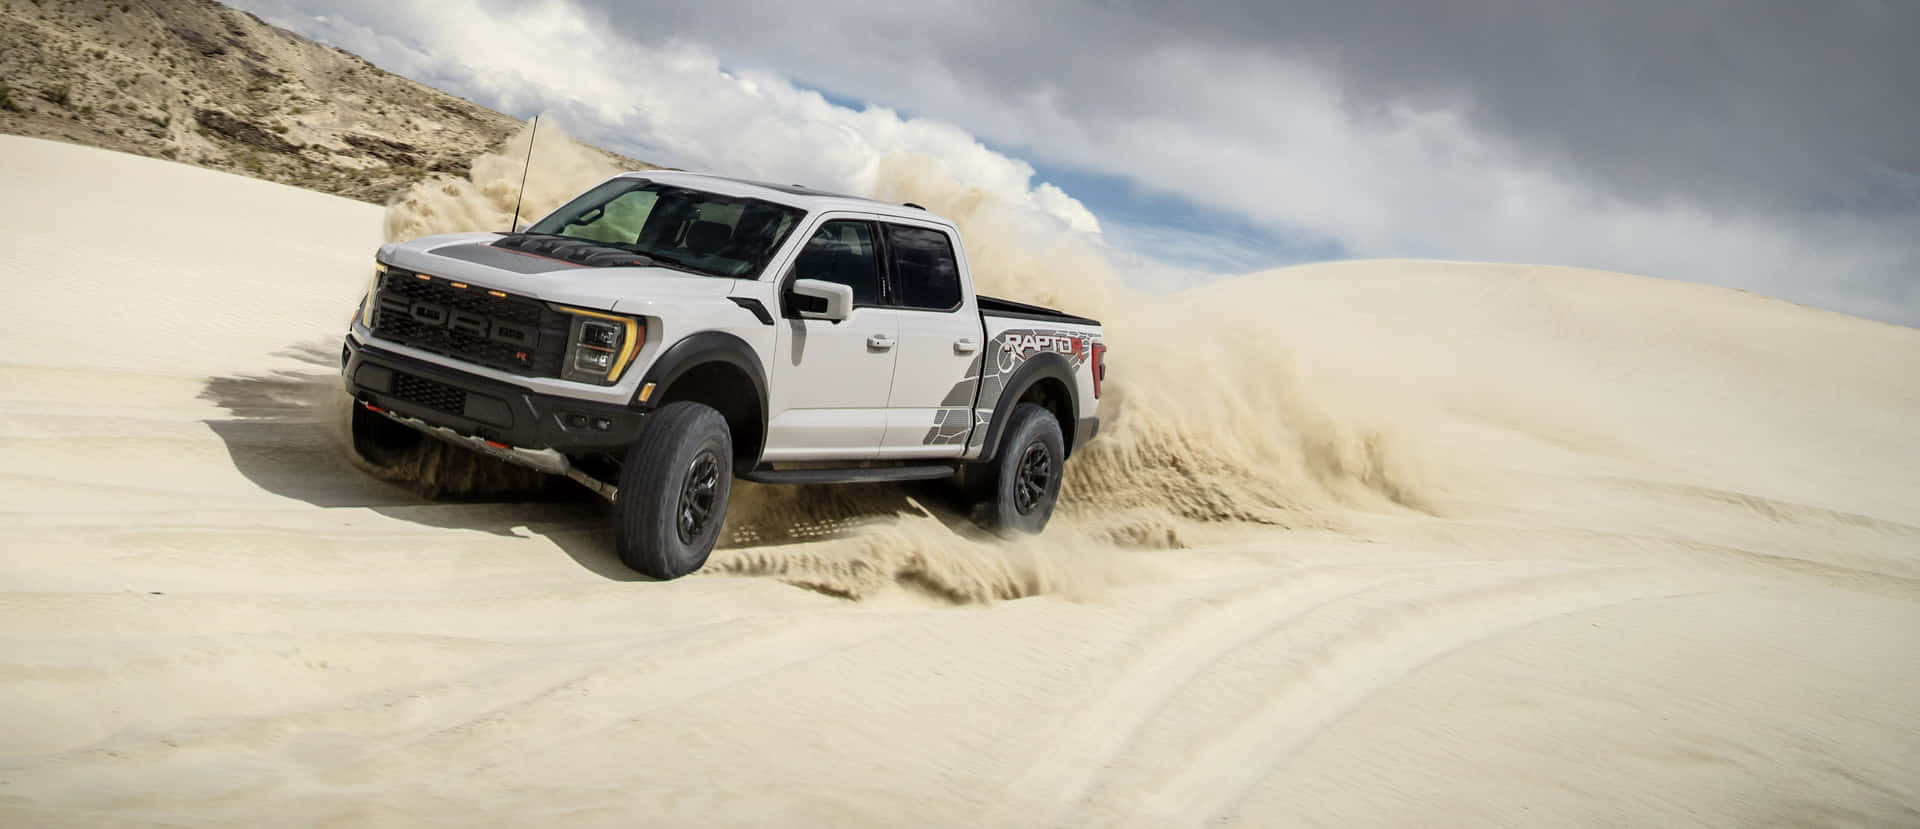 The White Ford F - 150 Raptor Is Driving Through The Sand Dunes Wallpaper